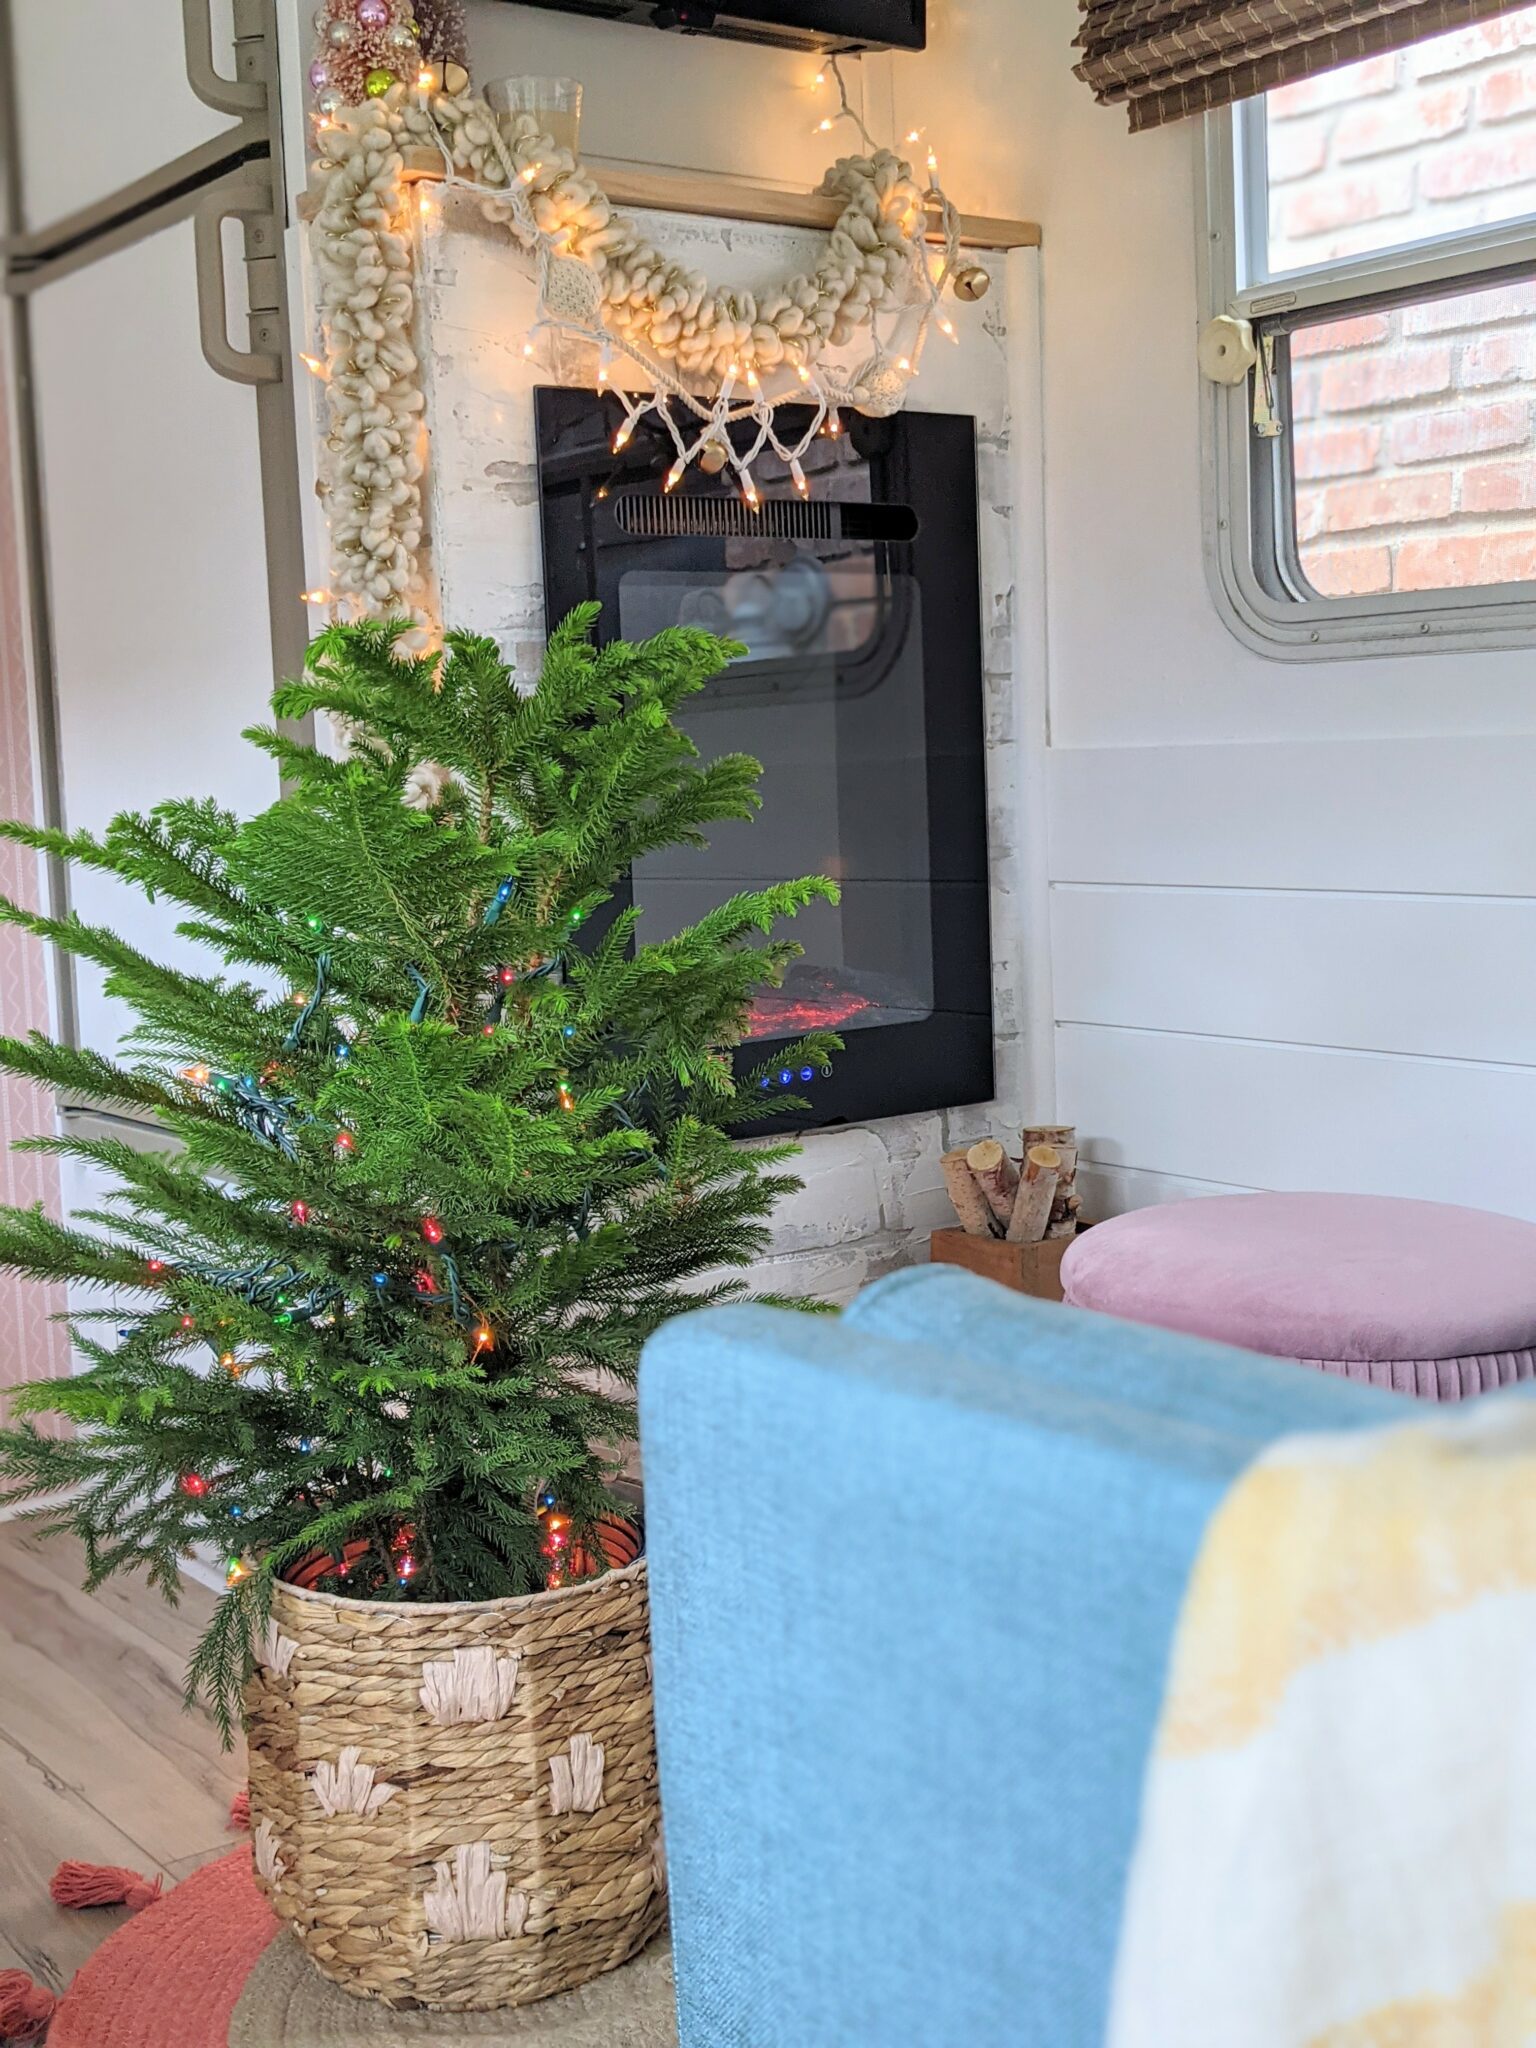 Colorful and Fun Christmas Decorations in the Renovated Camper All Things with Purpose Sarah Lemp 10